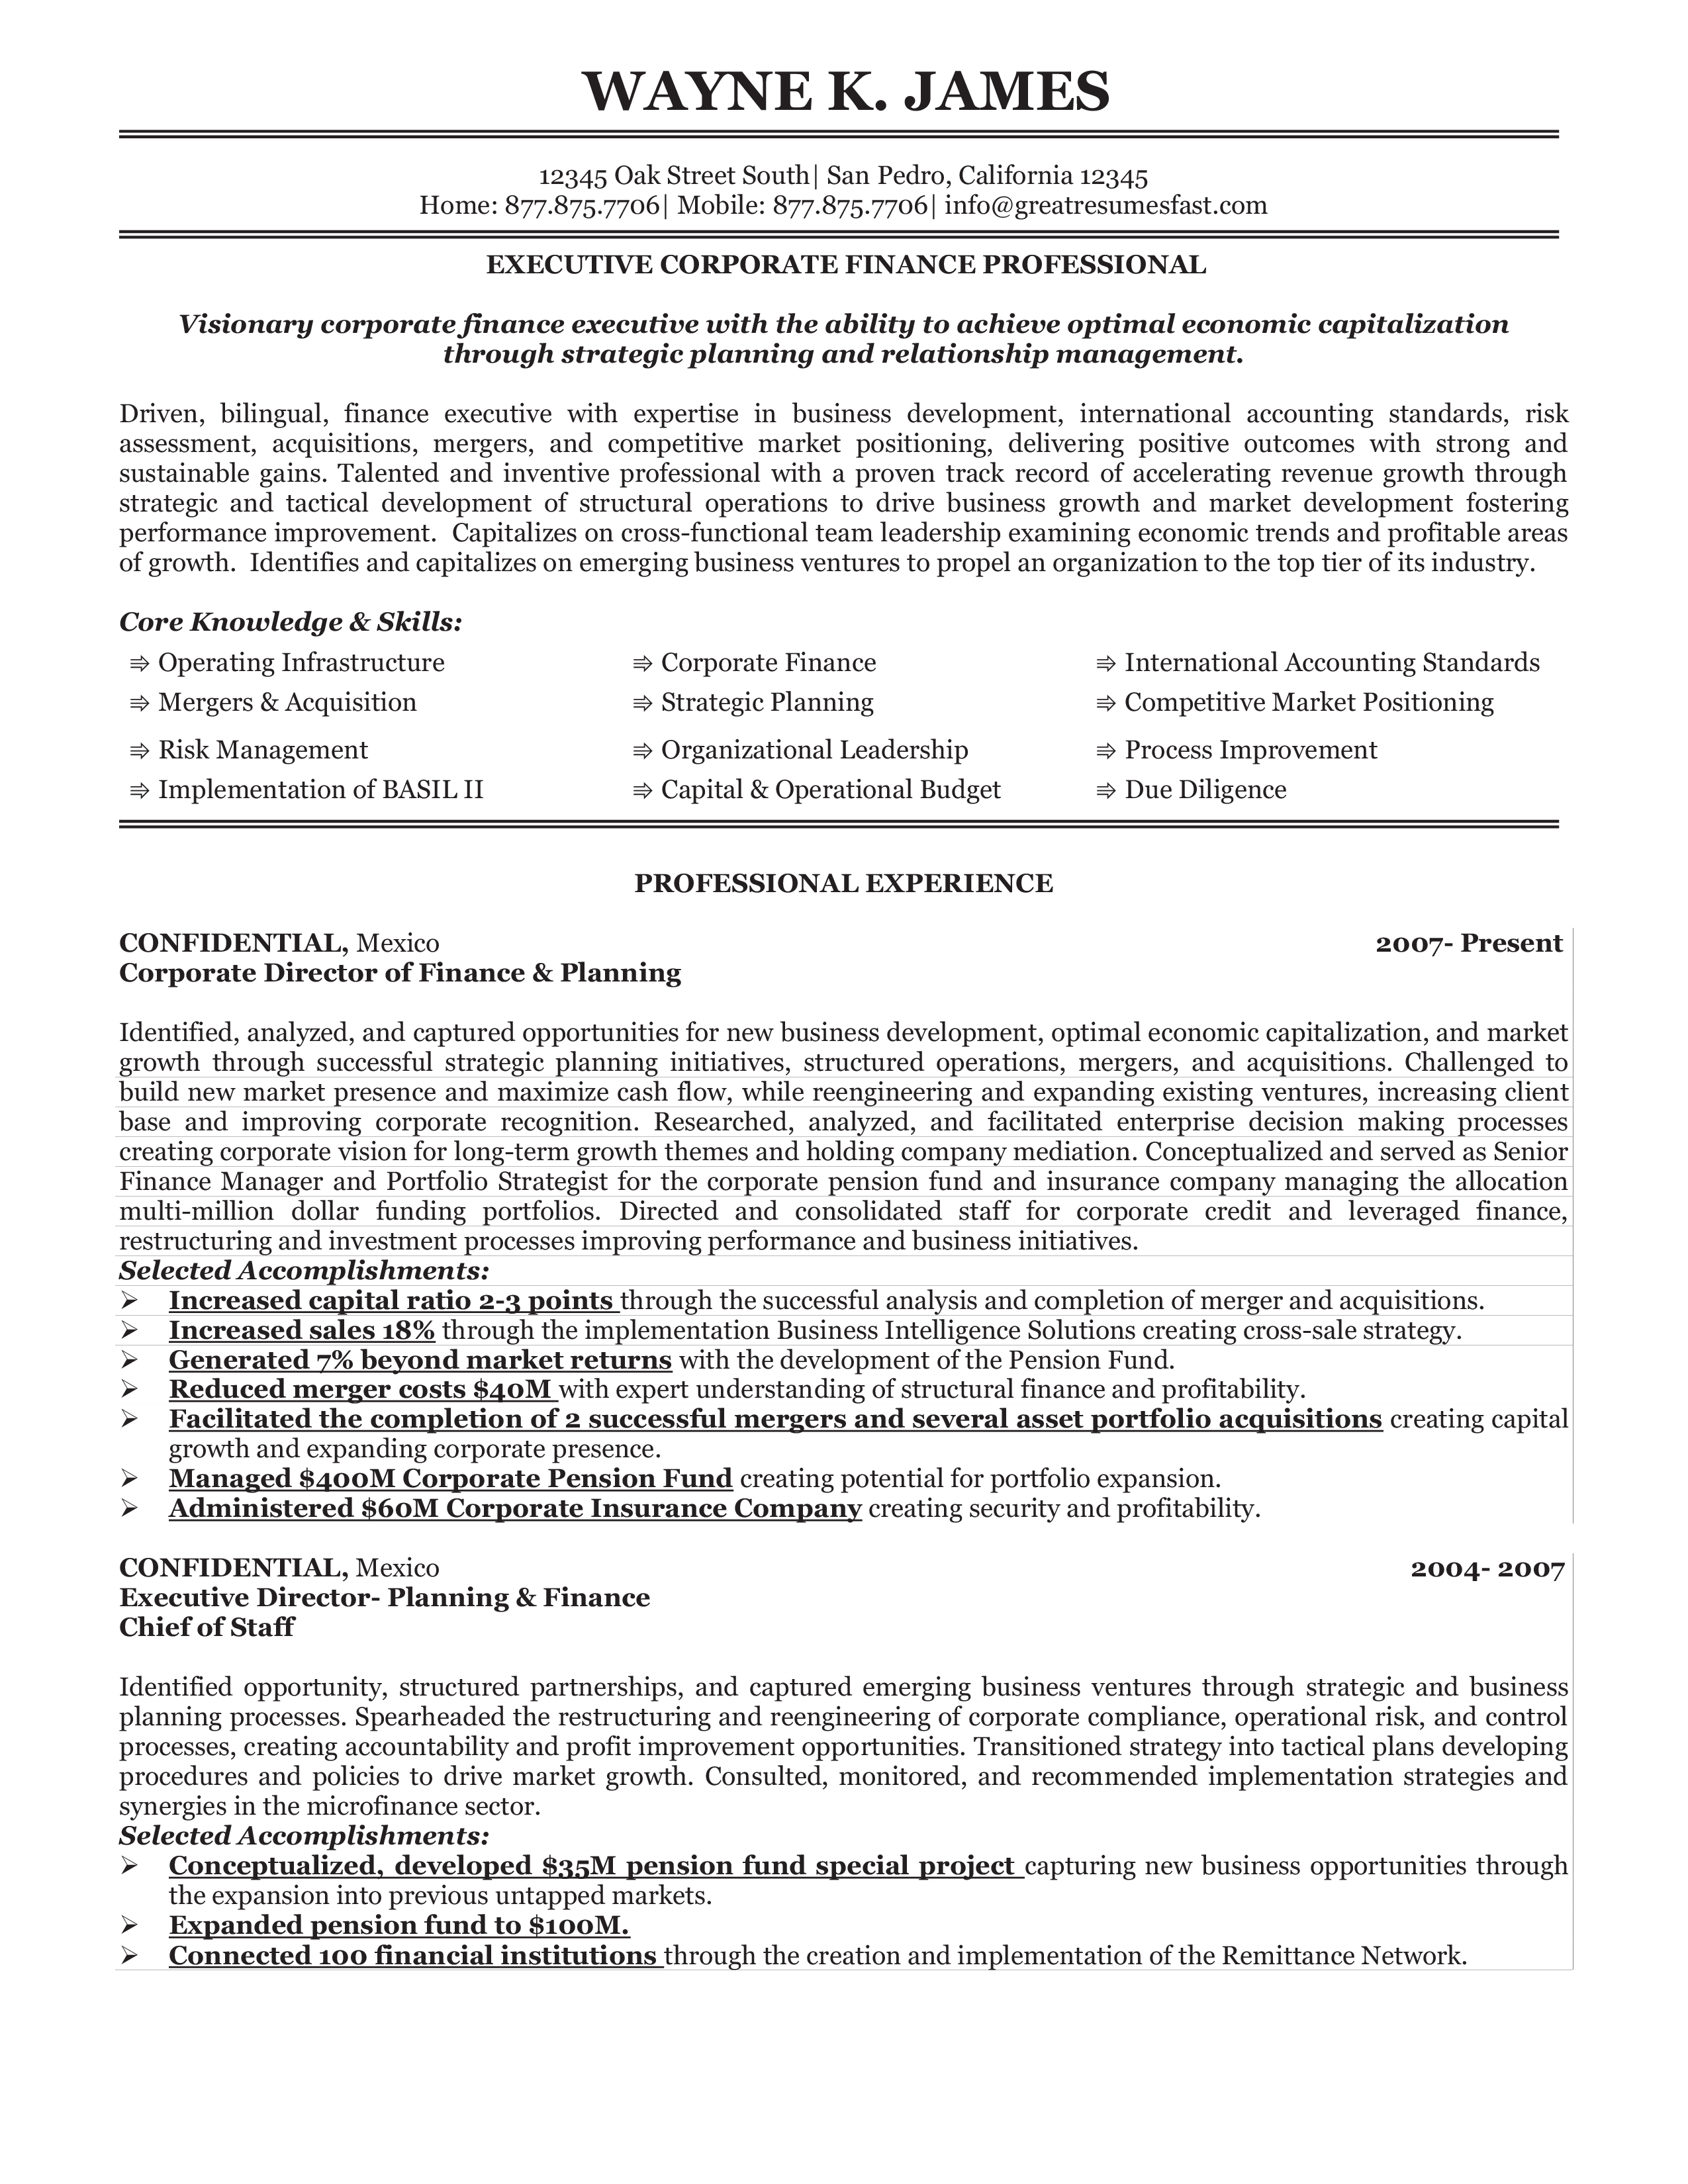 Corporate Finance Executive Resume Templates at